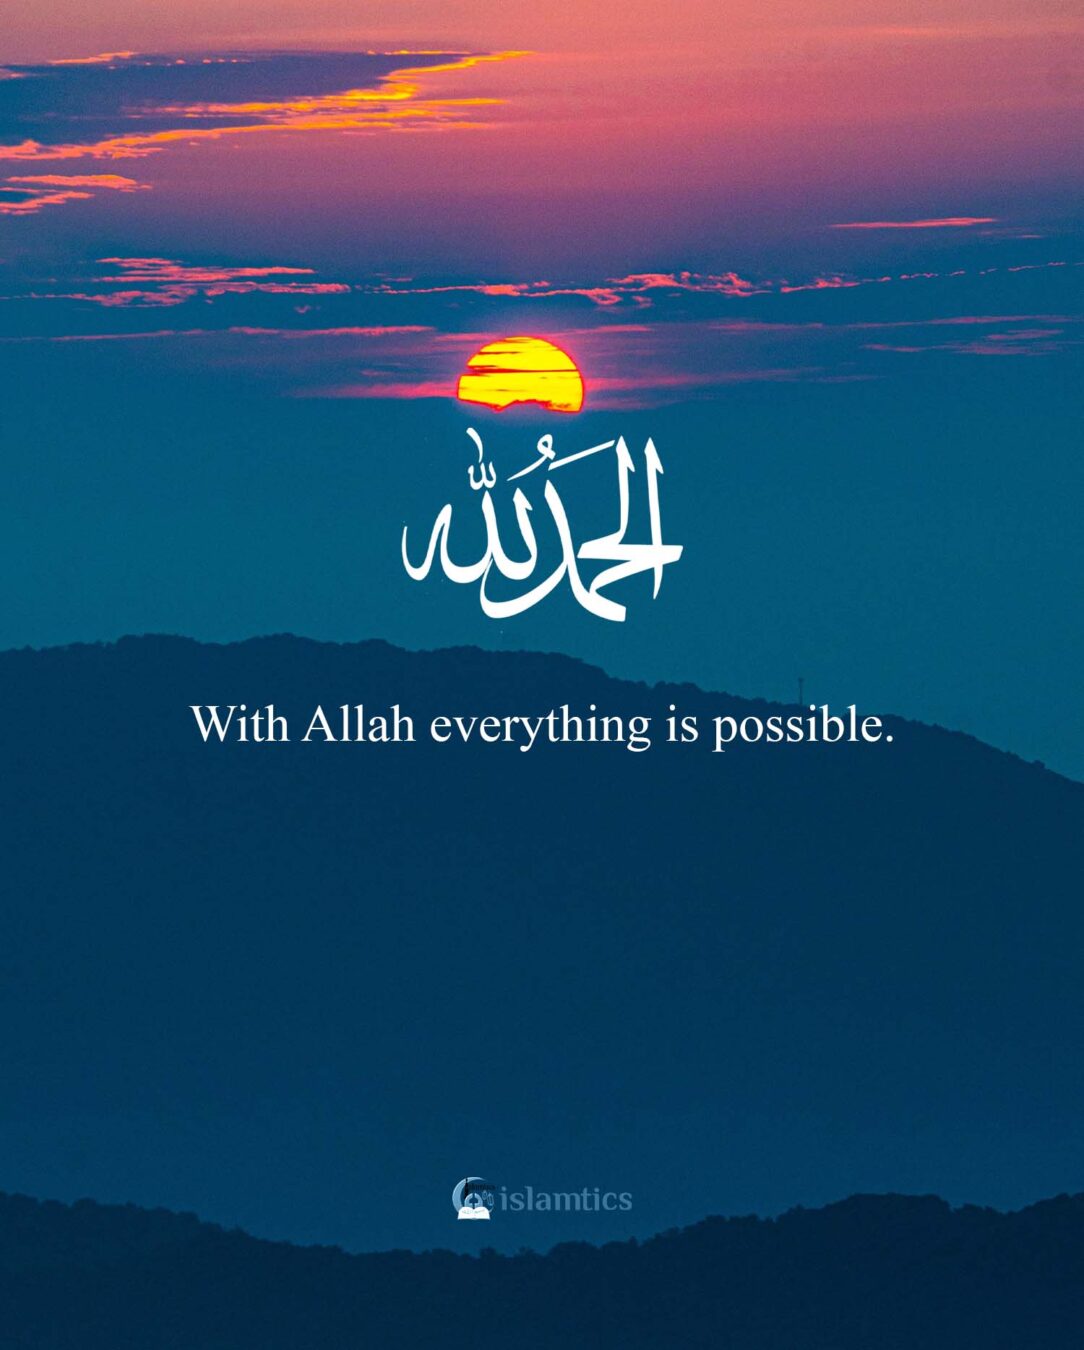 With Allah everything is possible. | islamtics